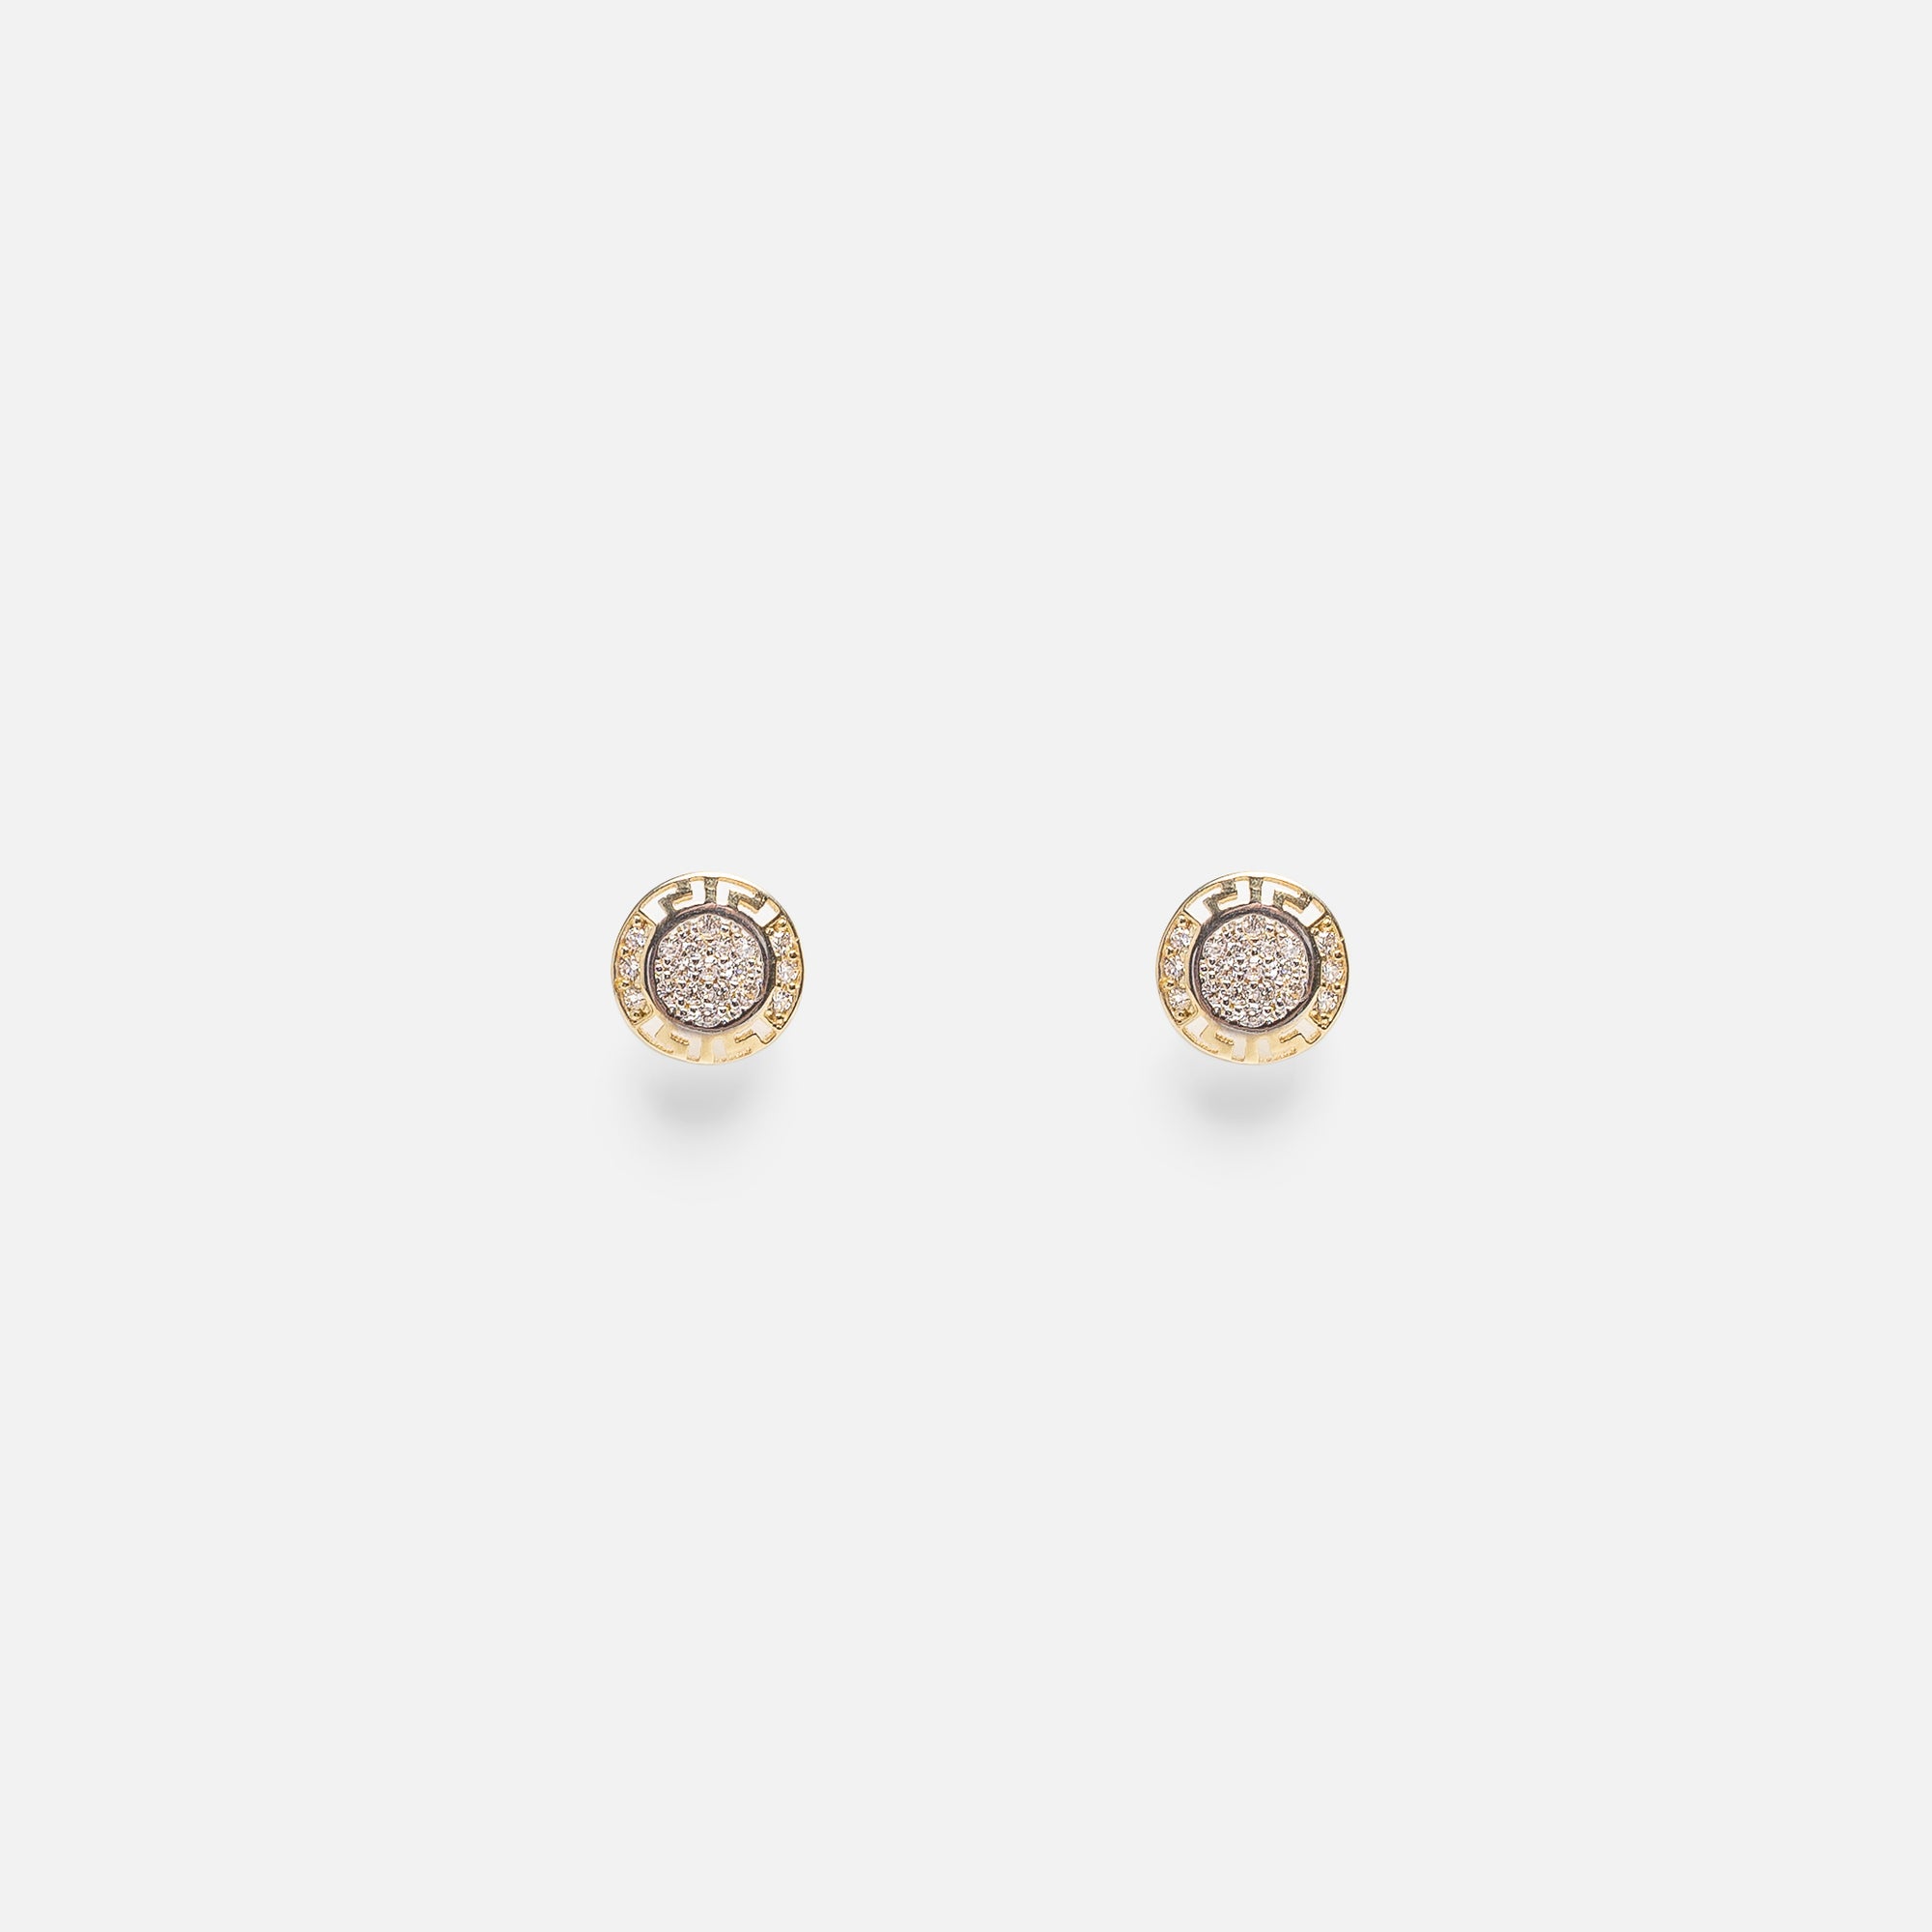 Fixed round 10k gold earrings